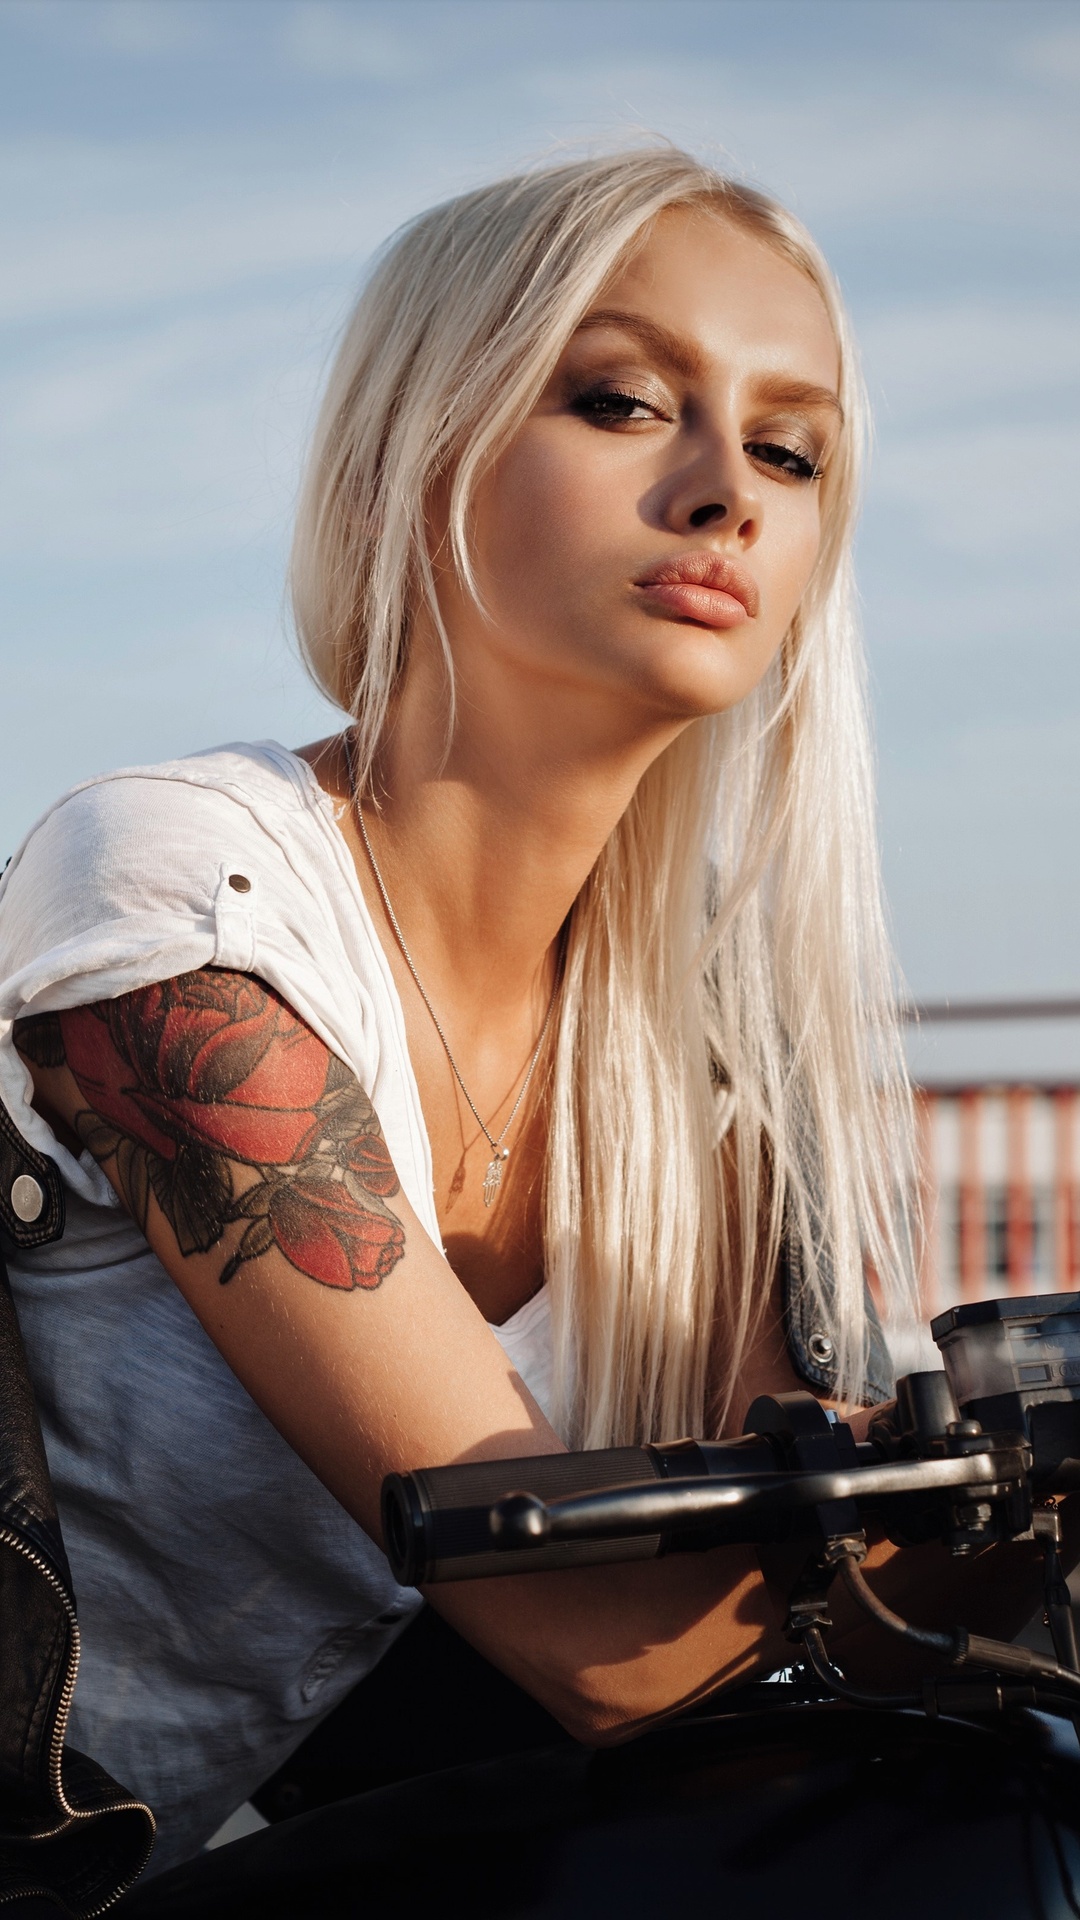 1080x1920 Tattoo Girl On Motorcycle 5k Iphone 7,6s,6 Plus, Pixel xl ,One  Plus 3,3t,5 HD 4k Wallpapers, Images, Backgrounds, Photos and Pictures